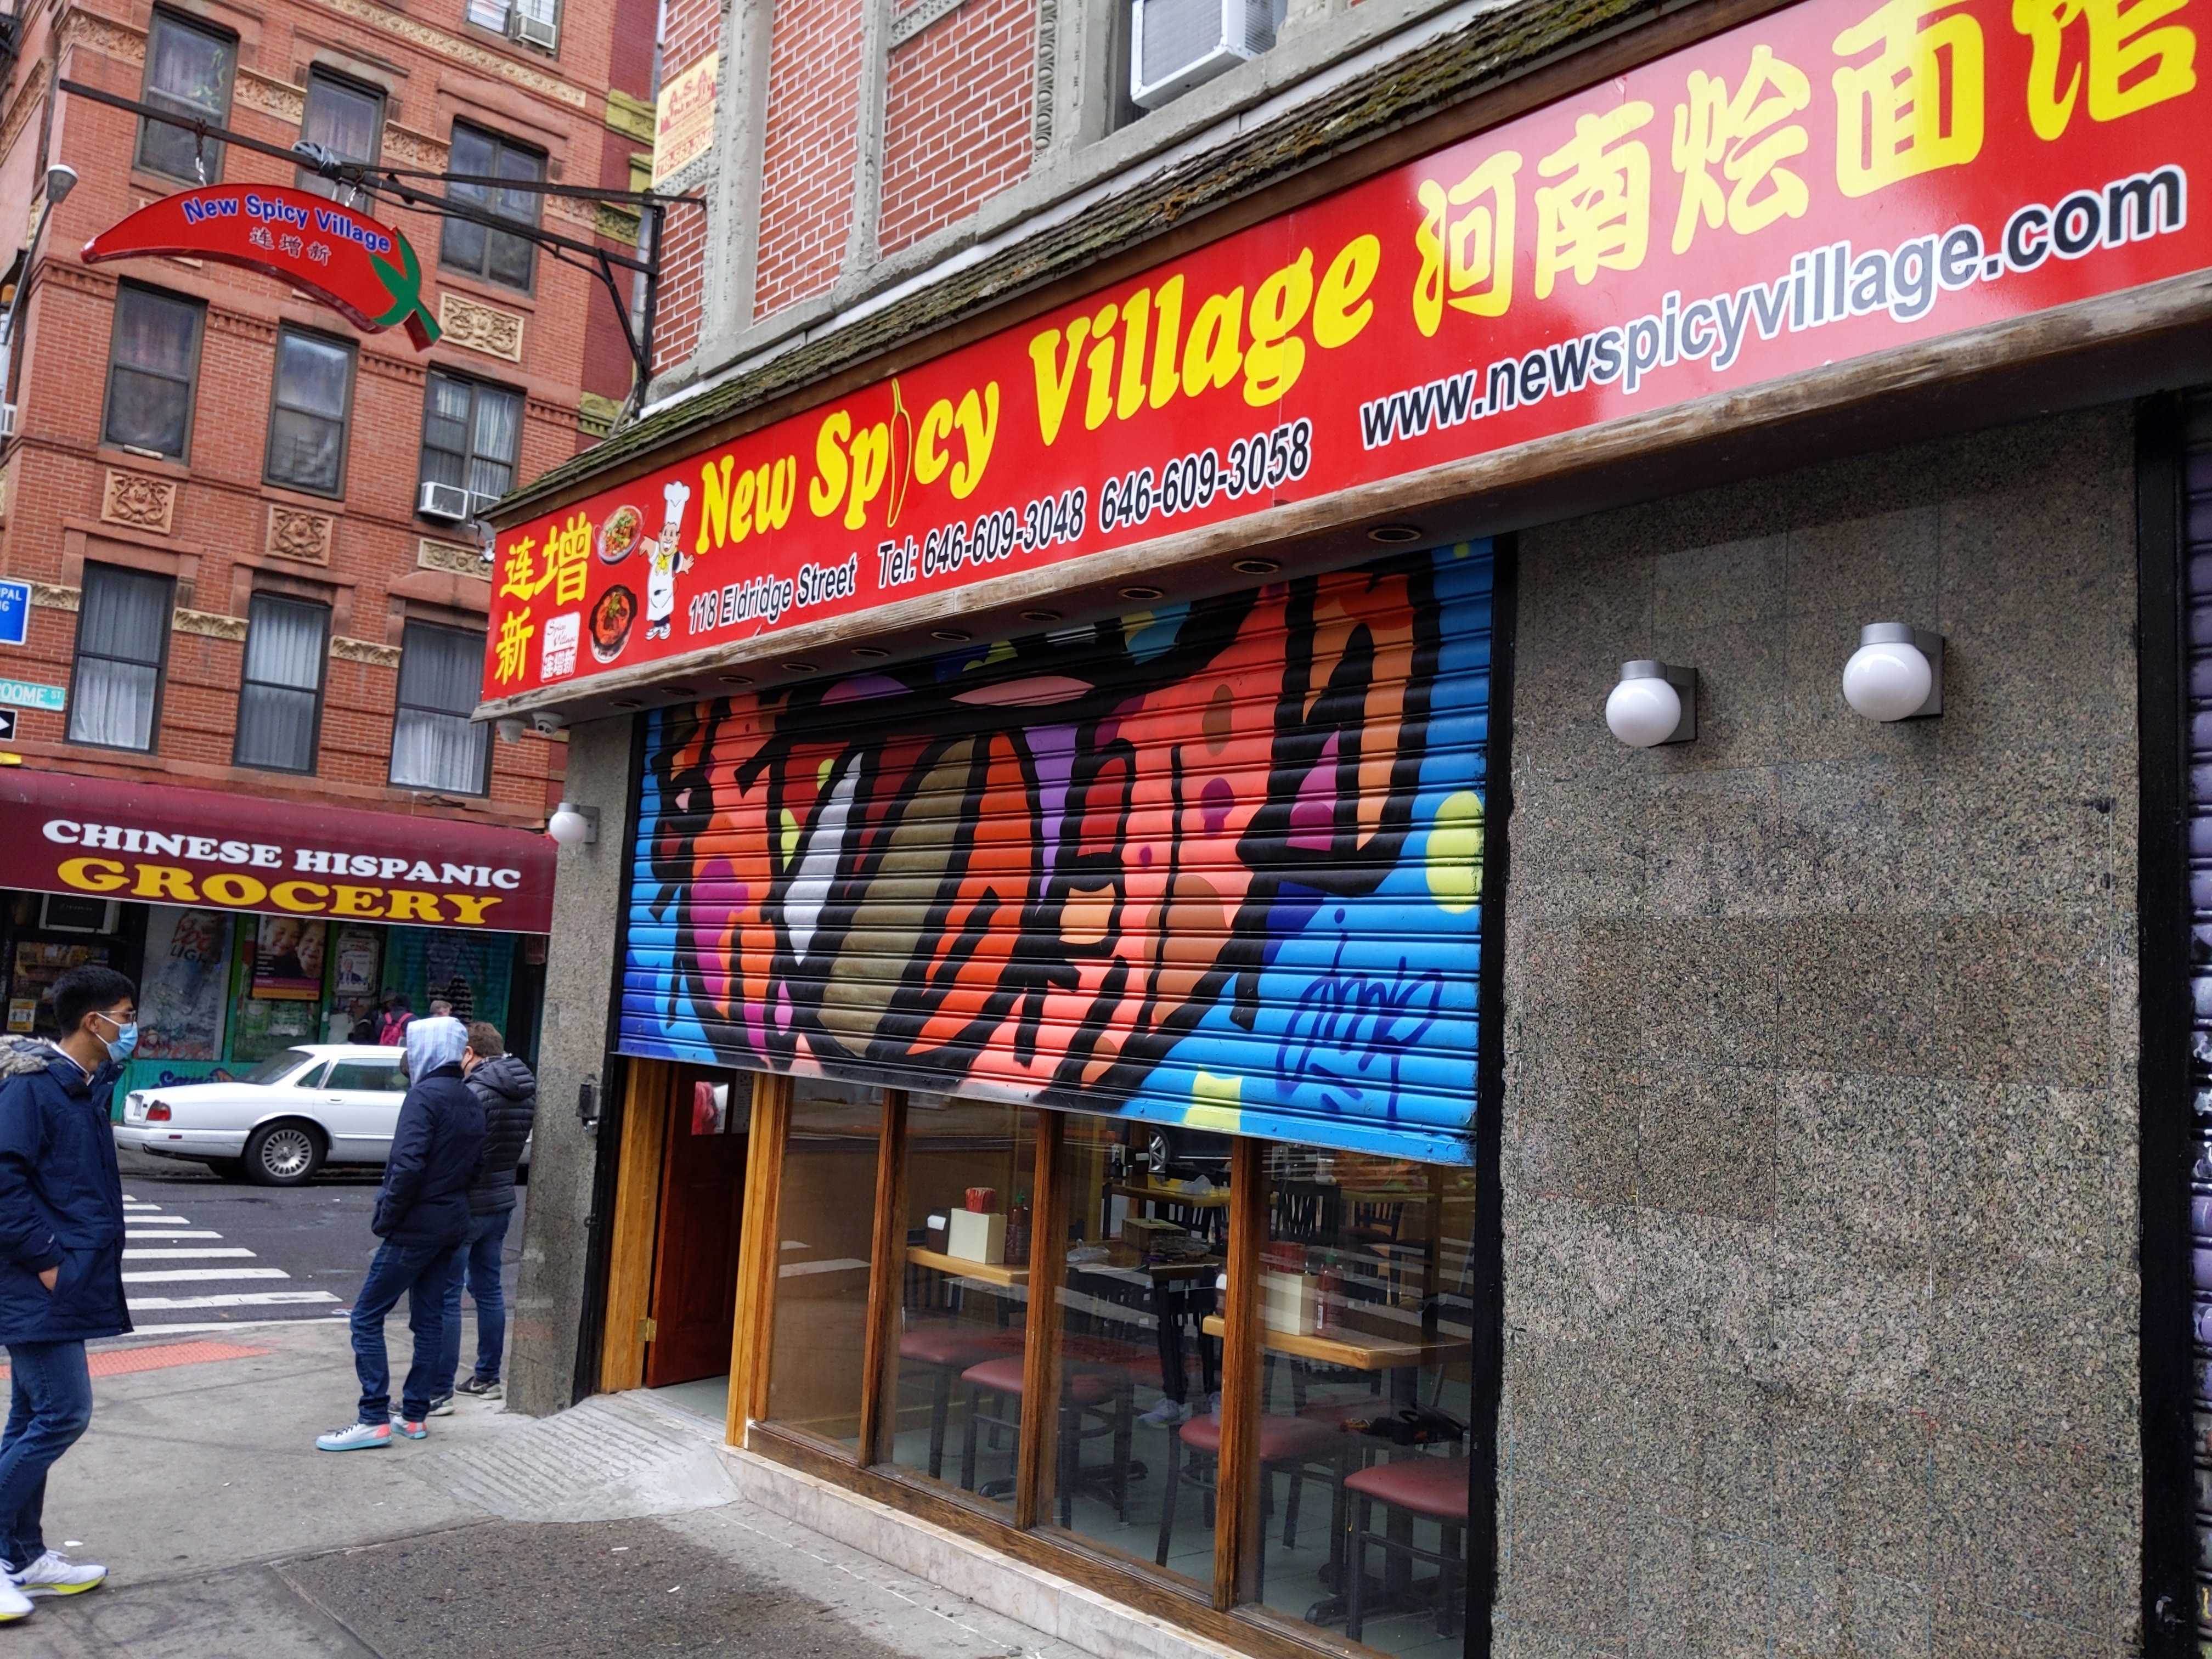 A red exterior restaurant sign with yellow lettering spelling out New Spicy Village. A graffitied gate is halfway covering the restaurant’s front windows.